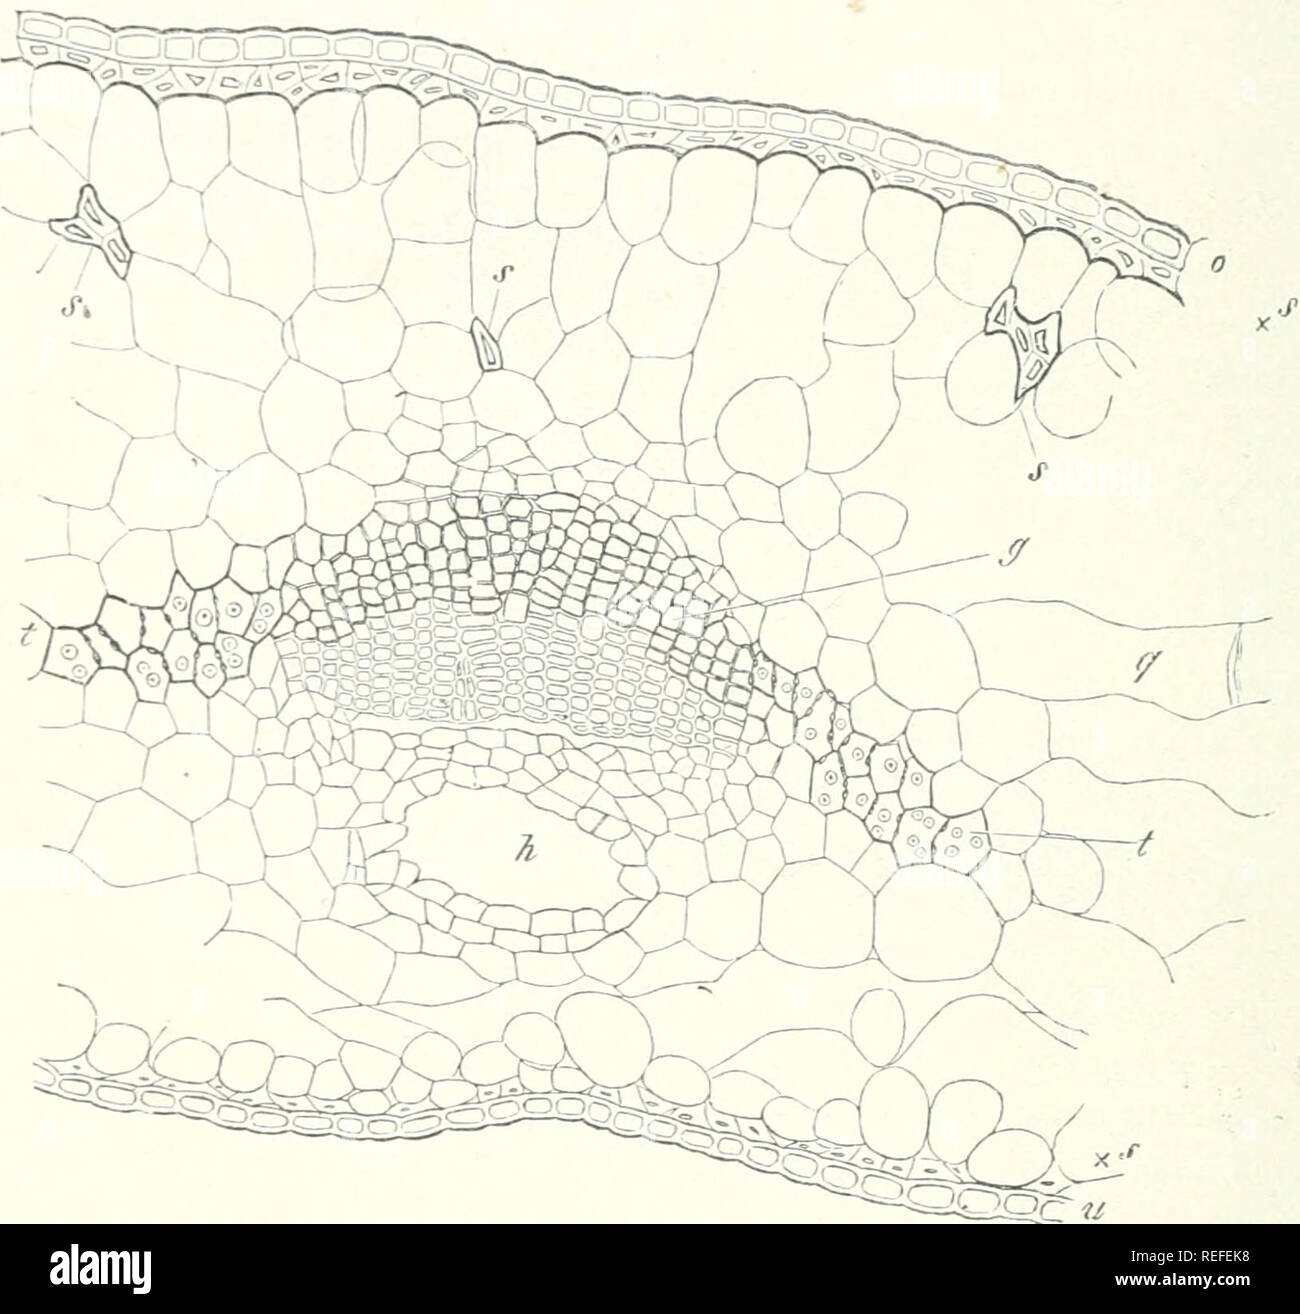 . Comparative anatomy of the vegetative organs of the phanerogams and ferns. Plant anatomy; Phanerogams; Ferns. 38o PRI^fARV ARRANGEMENT OF TISSUES. cells. The border is in fact curved round the xylem in Sciadopitys, Araucaria brasiliensis, Cryptomeria, and Dammara; round the phloem in Abies pectinata and Pinsapo. In Abies excelsa and the Pines (P. silvestris, Laricio) it is split as it were into two plates on each side at its place of attachment, which, in a manner still to be more accurately described, are bent, the one round the xylem, the other round the phloem, so that the pair of bundles Stock Photo